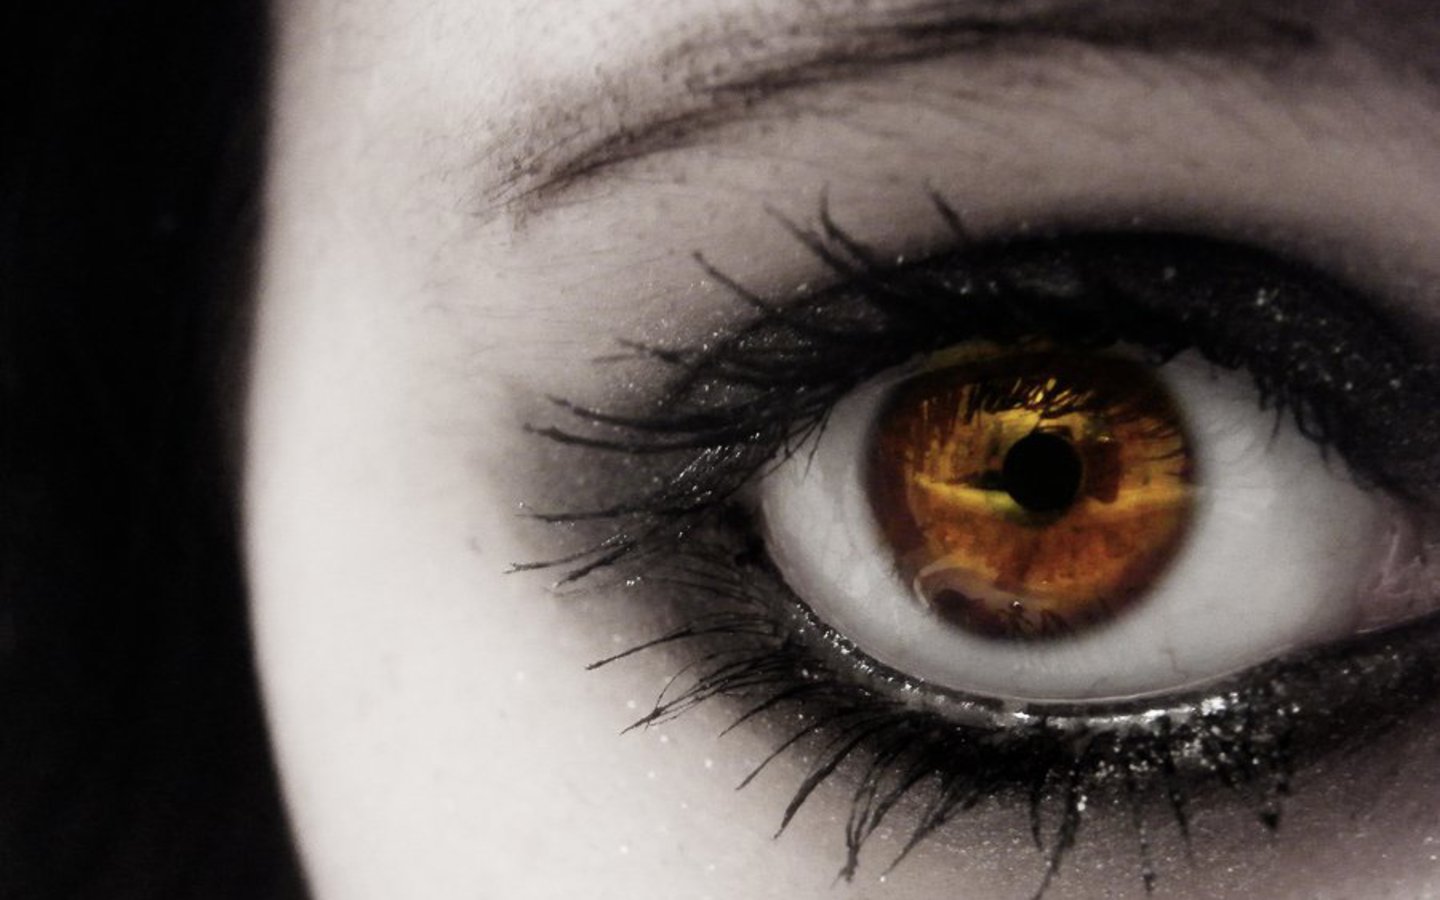 Astonishing Compilation of Full 4K Images of Girls' Eyes - Over 999  Exquisite Pictures